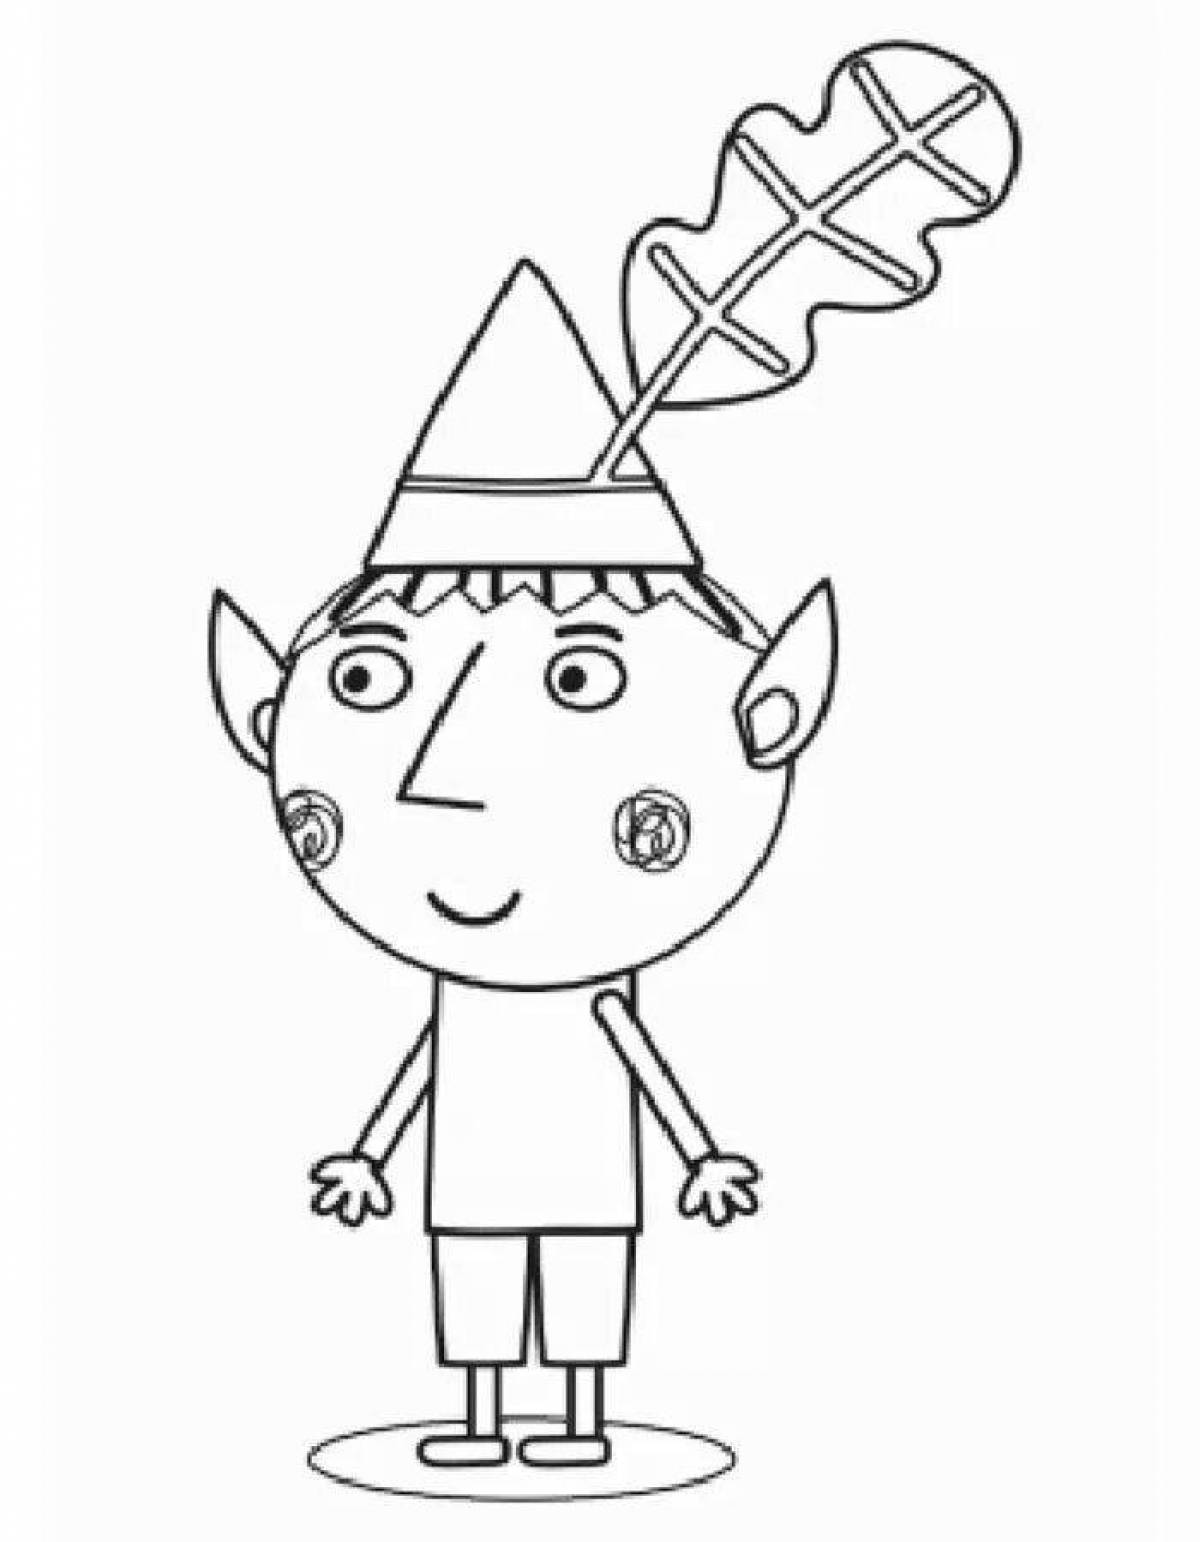 Playful holly coloring page